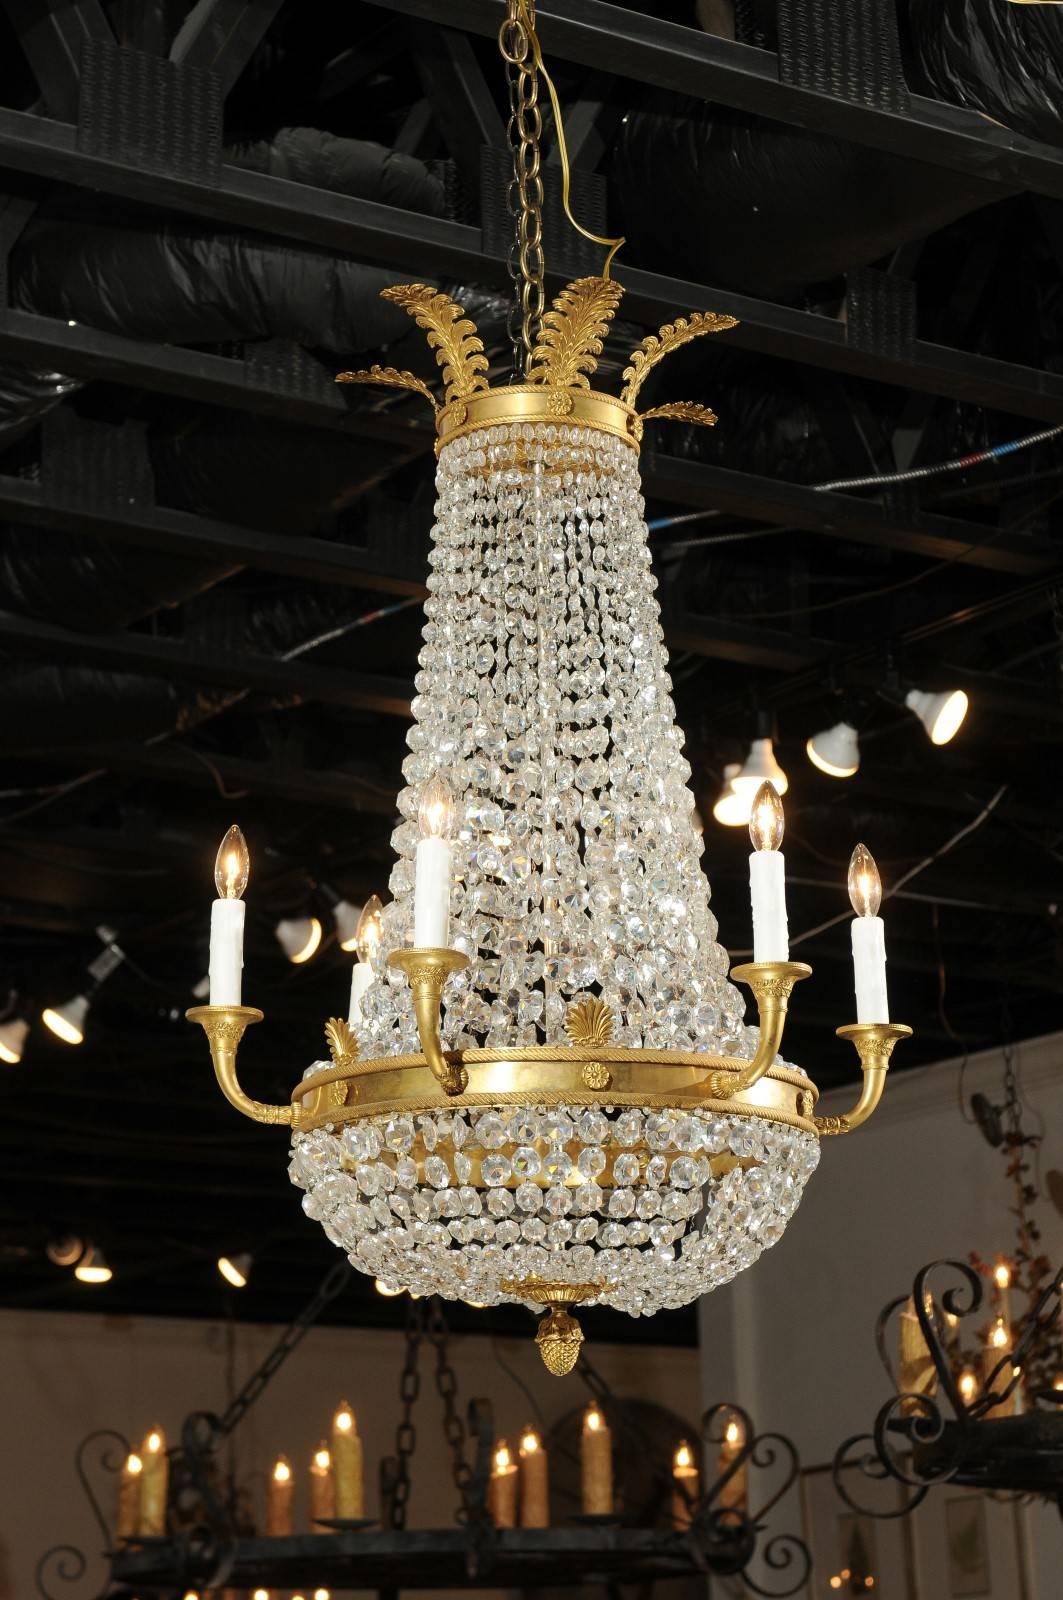 A French Empire style crystal and gilt metal waterfall basket six-light chandelier from the late 19th century. This exquisite French basket chandelier features a tall silhouette, accented by a gilt metal frame. Ornate acanthus leaves decorate the